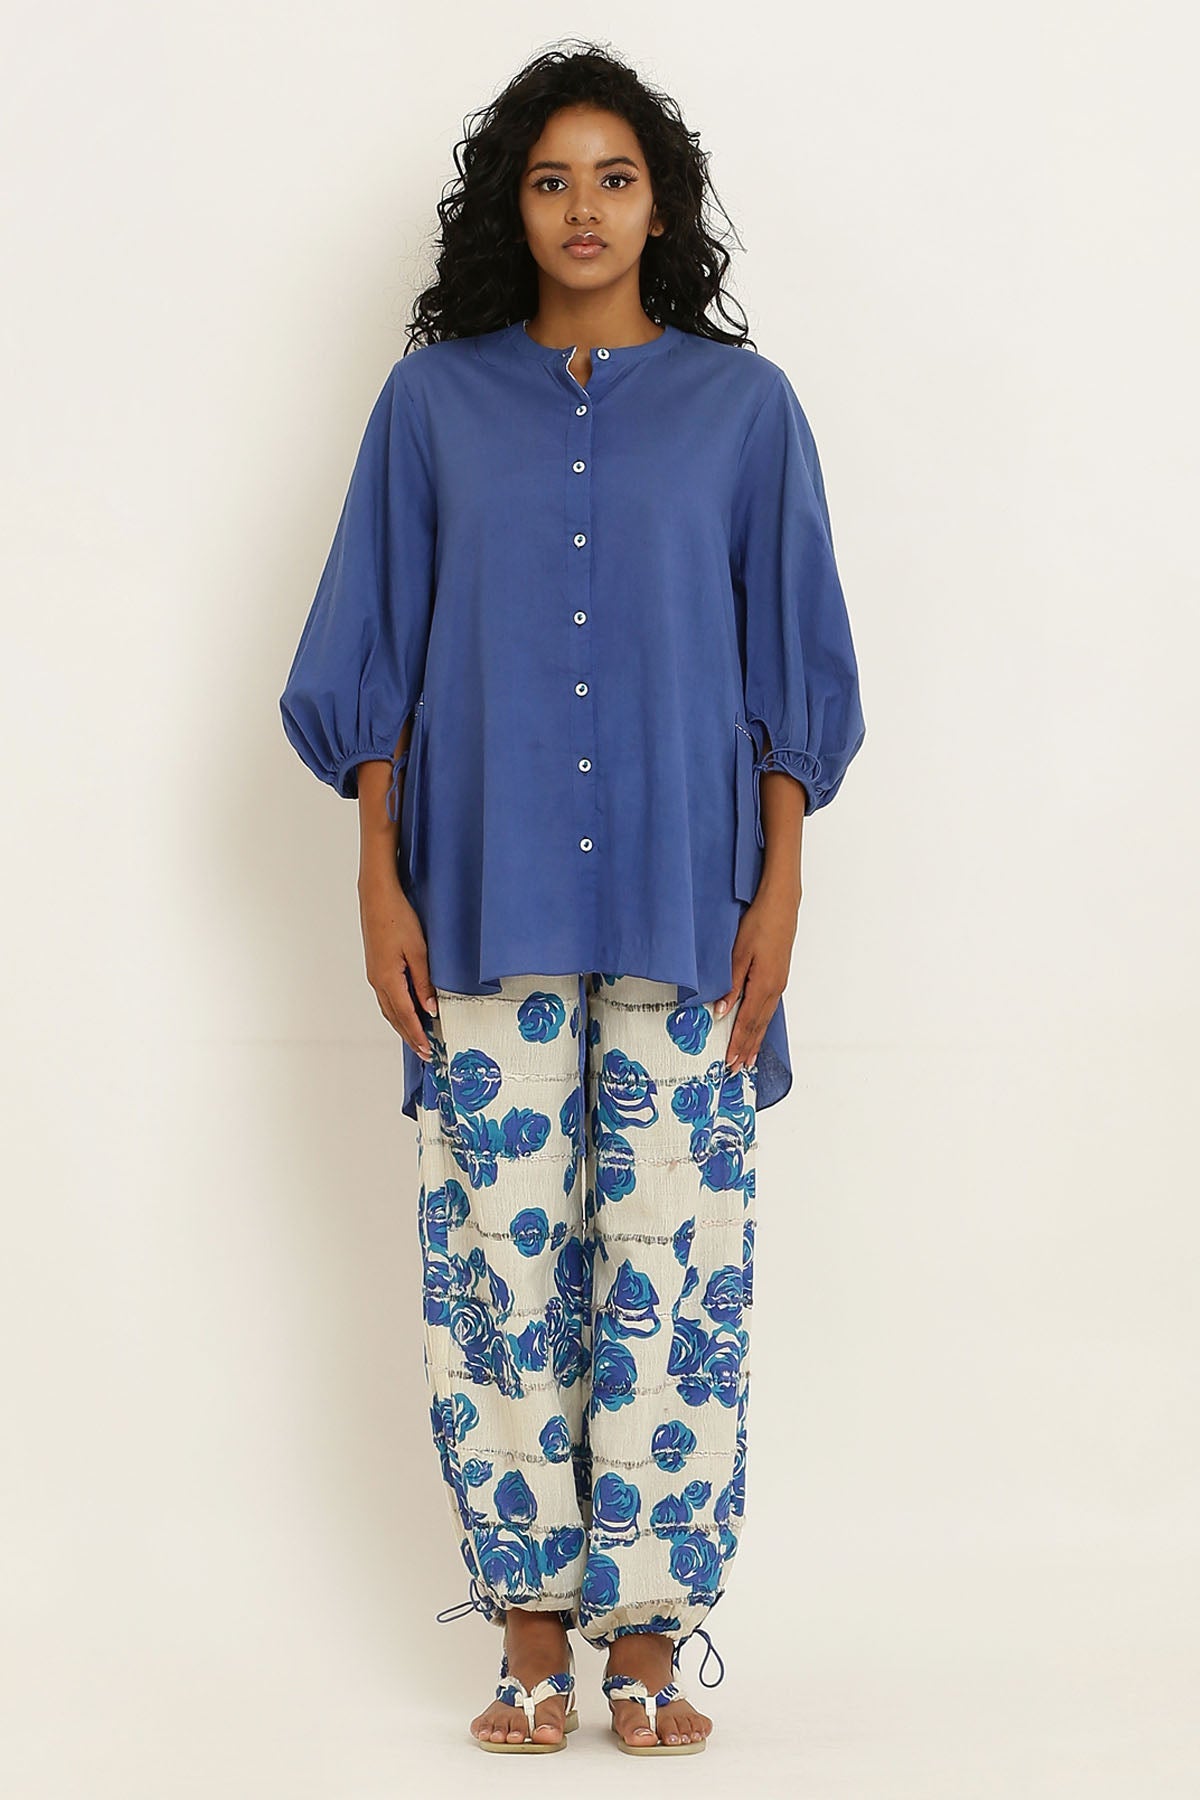 Designer Kusmi Indigo Expedition: Embroidered Cotton Shirt with Pockets For Women at ScrollnShops